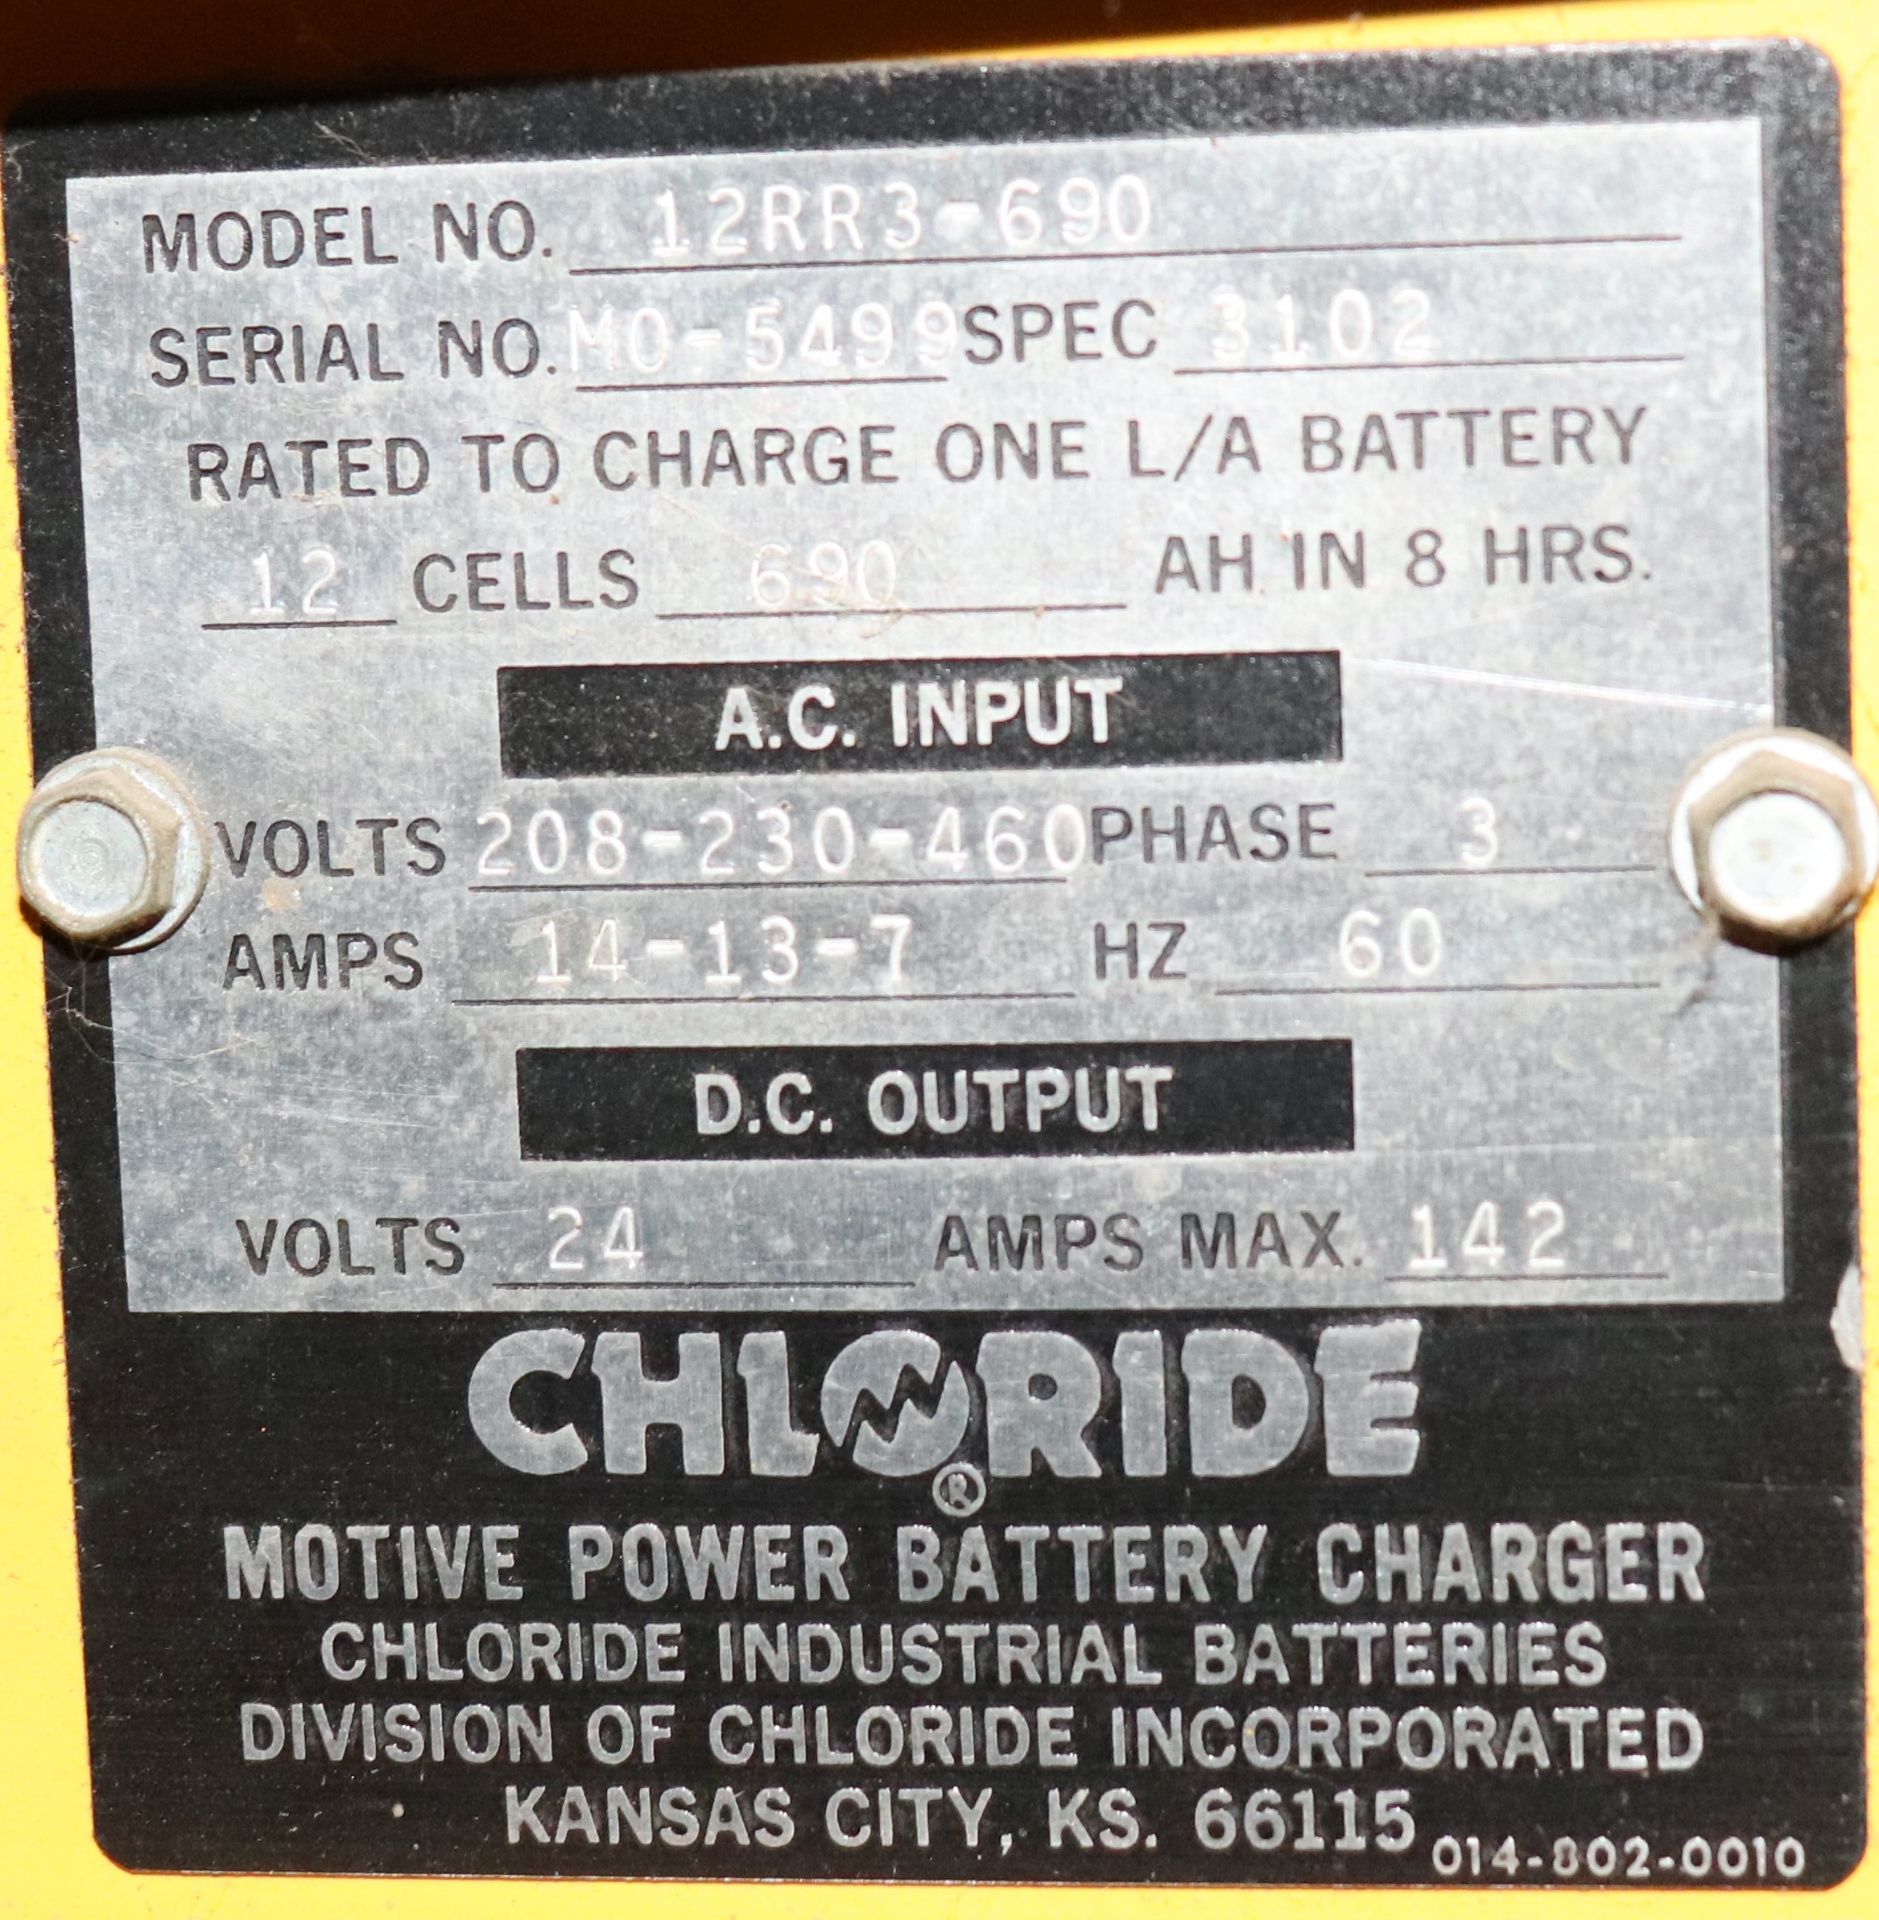 Chloride motive power battery charger, model 12RR3-690, serial MO-5499 - Image 2 of 2